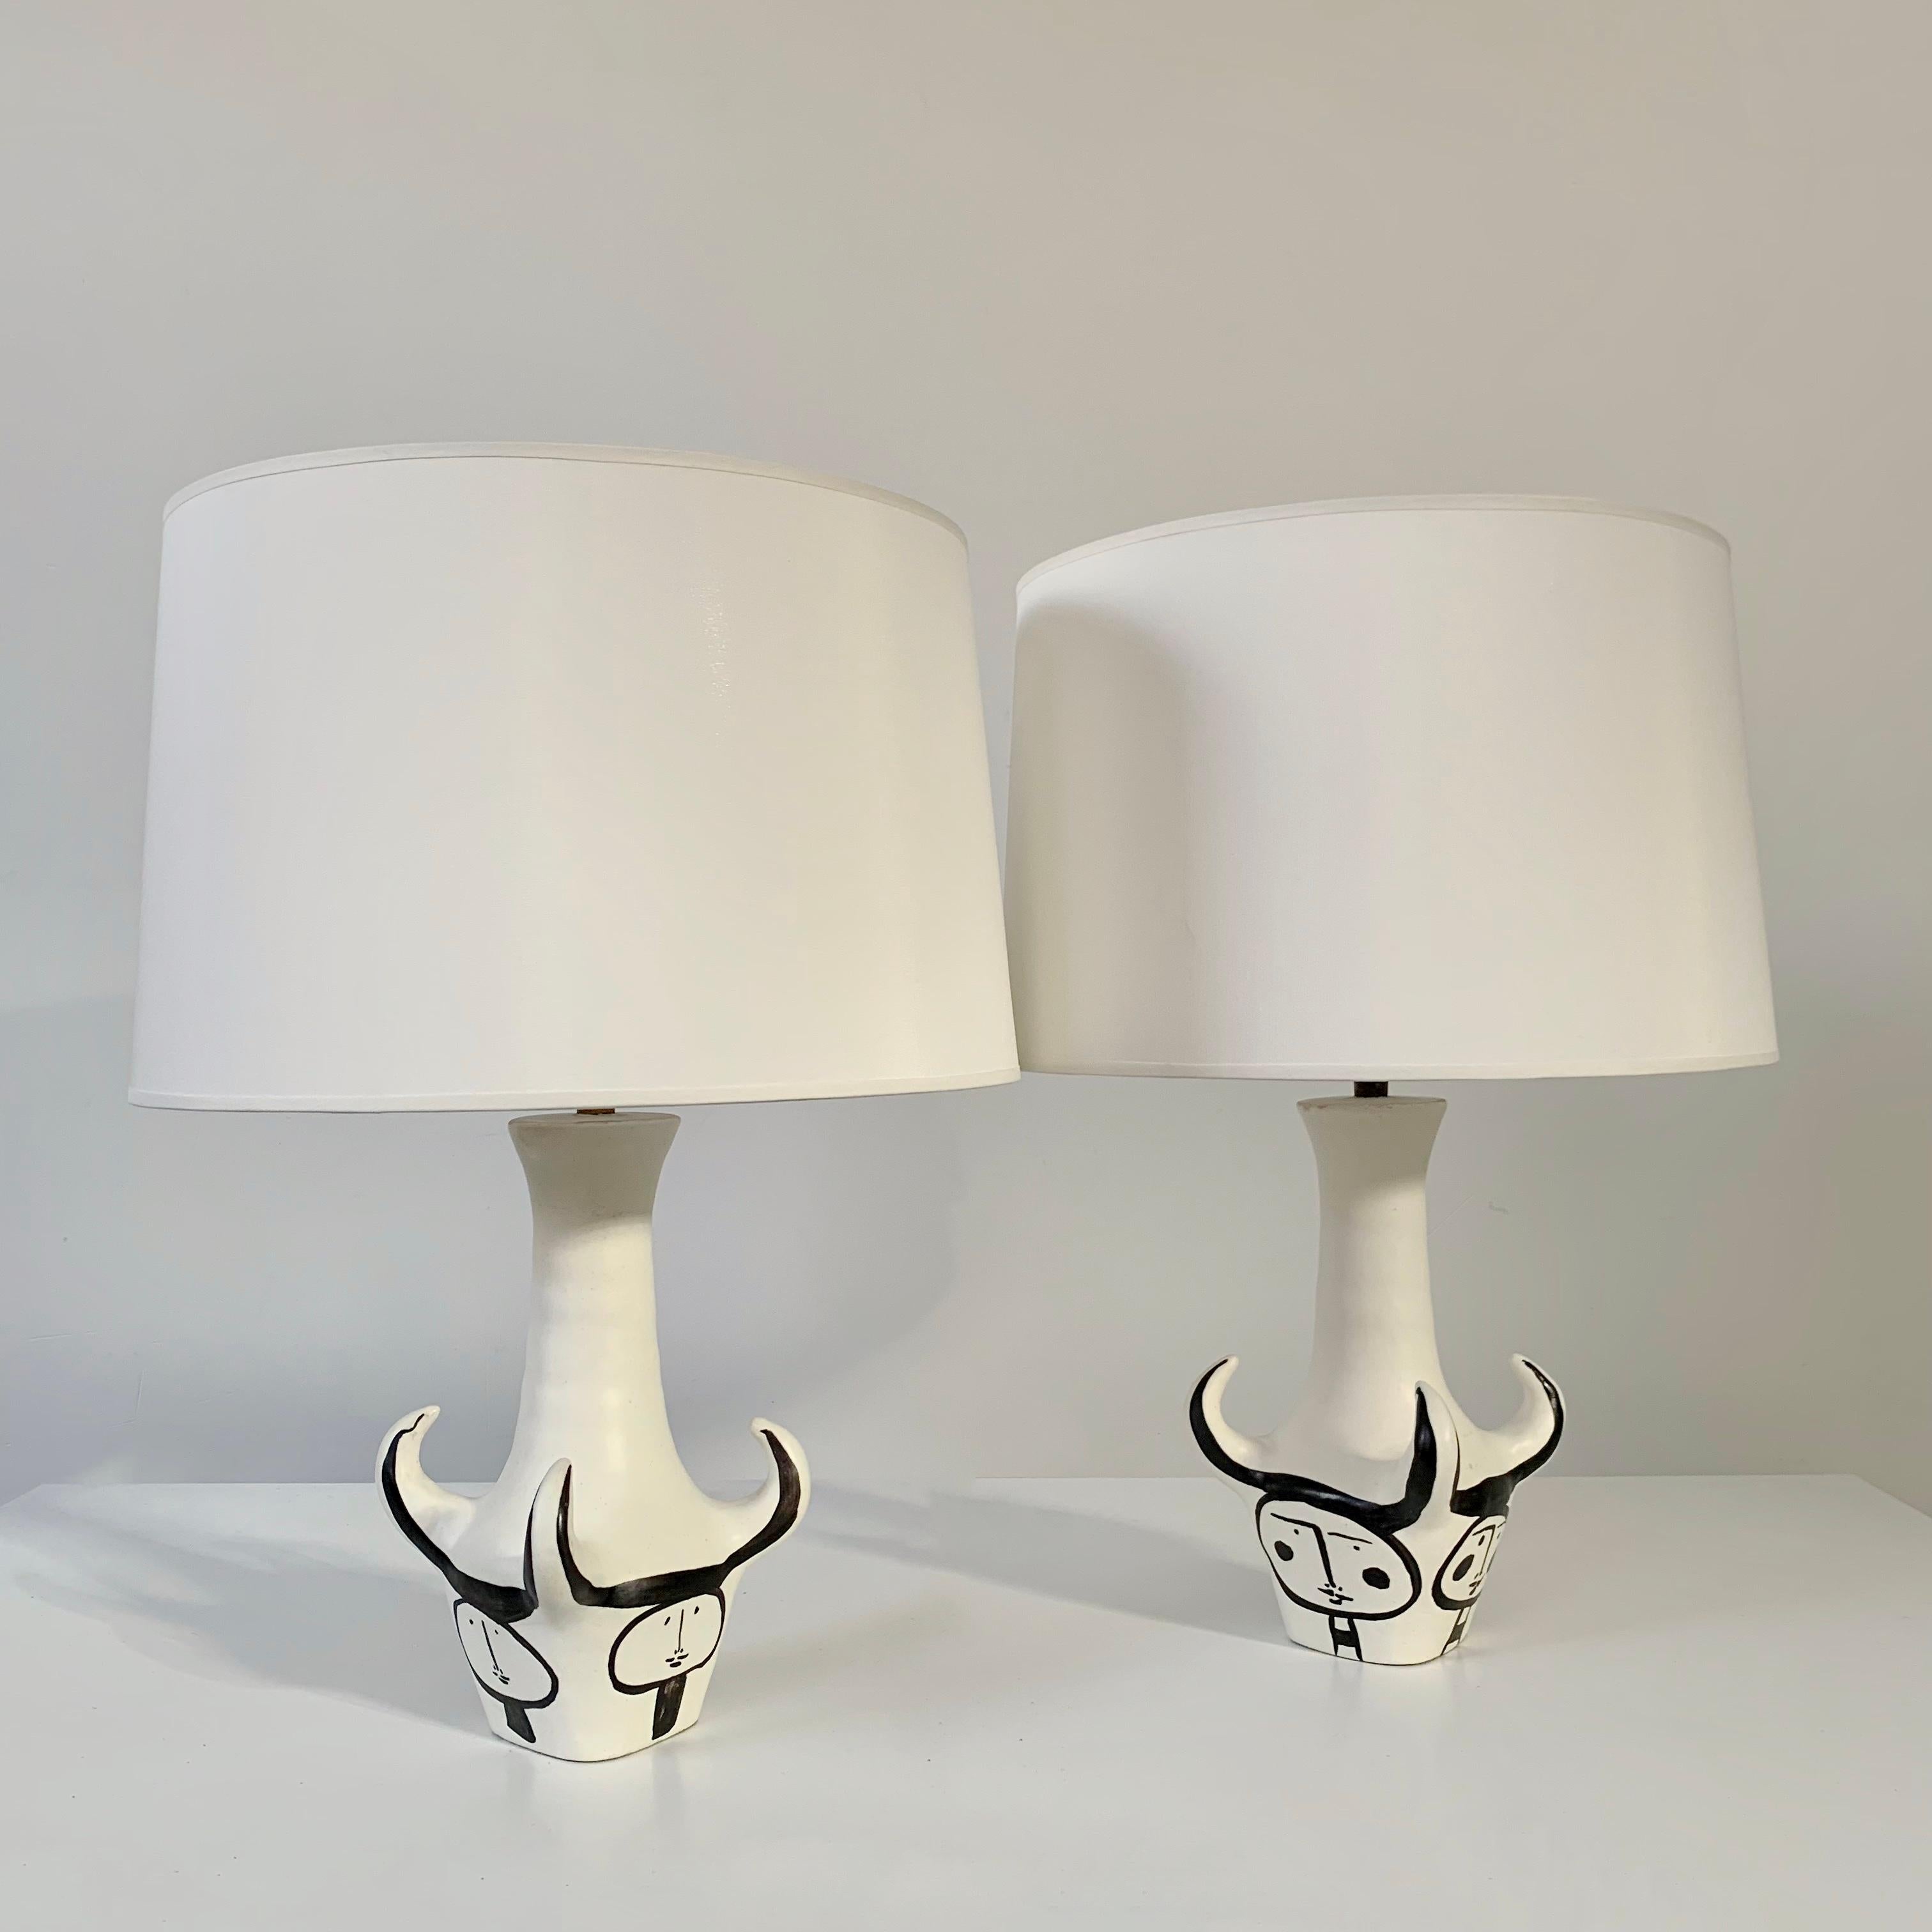  Roger Capron Pair Of 4 Horns Signed Ceramic Table Lamps , um 1955, Frankreich. im Zustand „Gut“ im Angebot in Brussels, BE